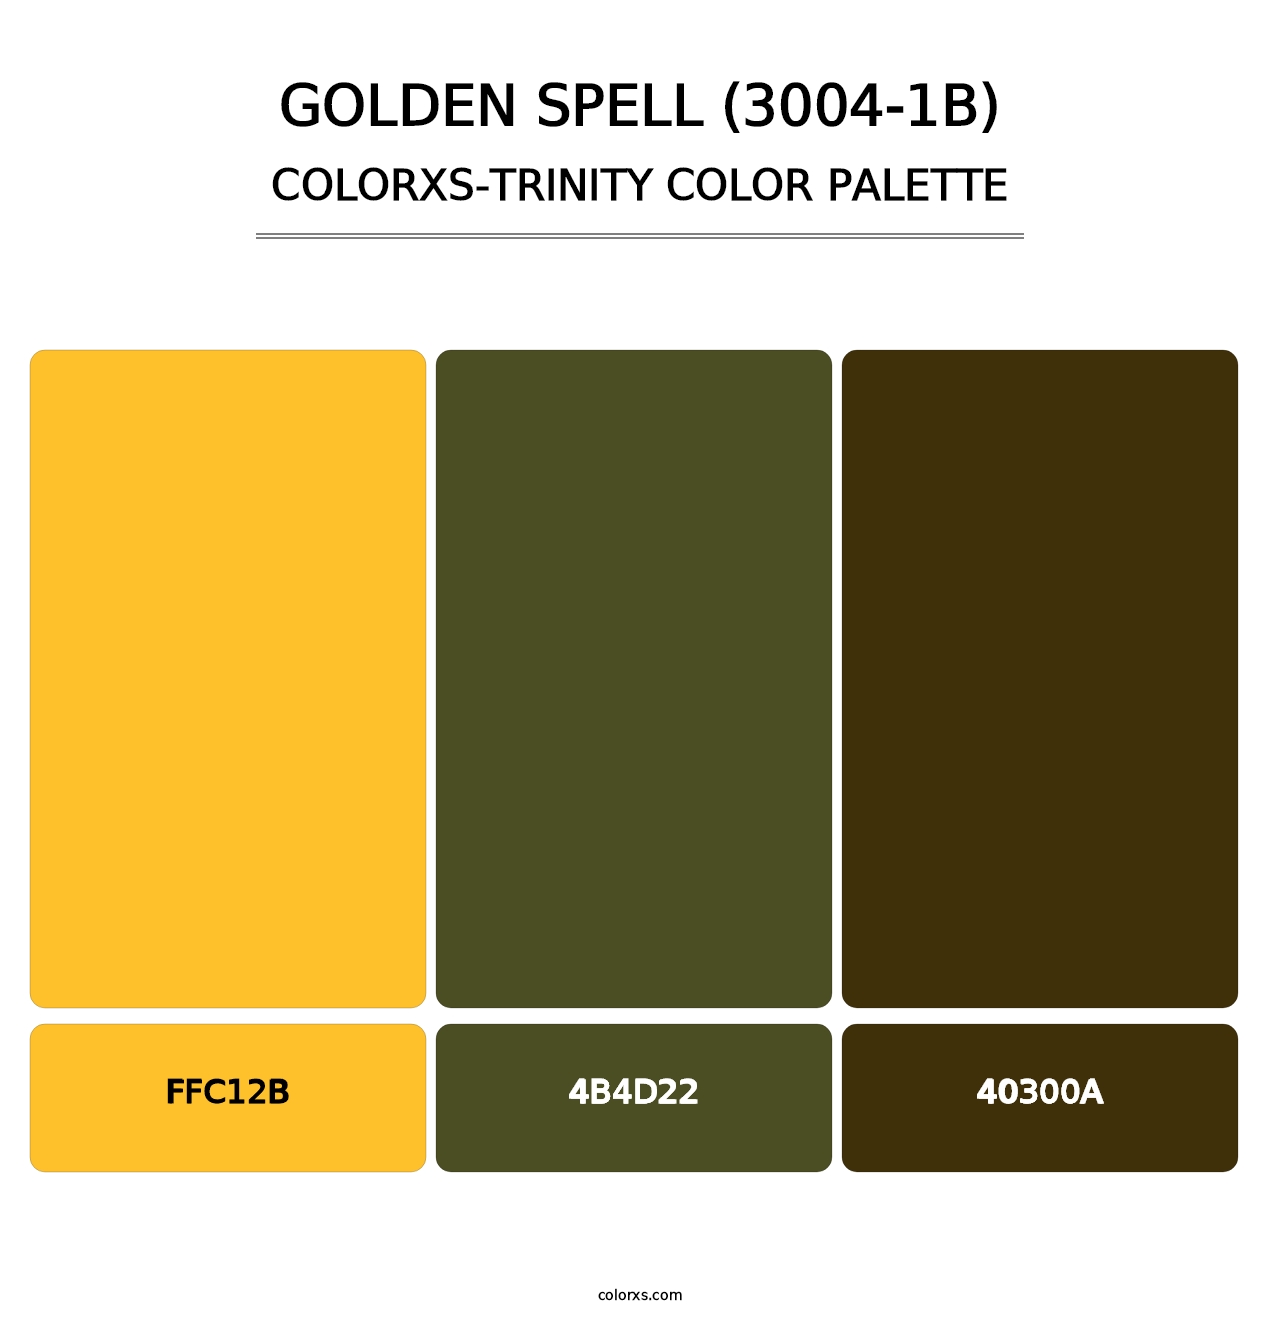 Golden Spell (3004-1B) - Colorxs Trinity Palette